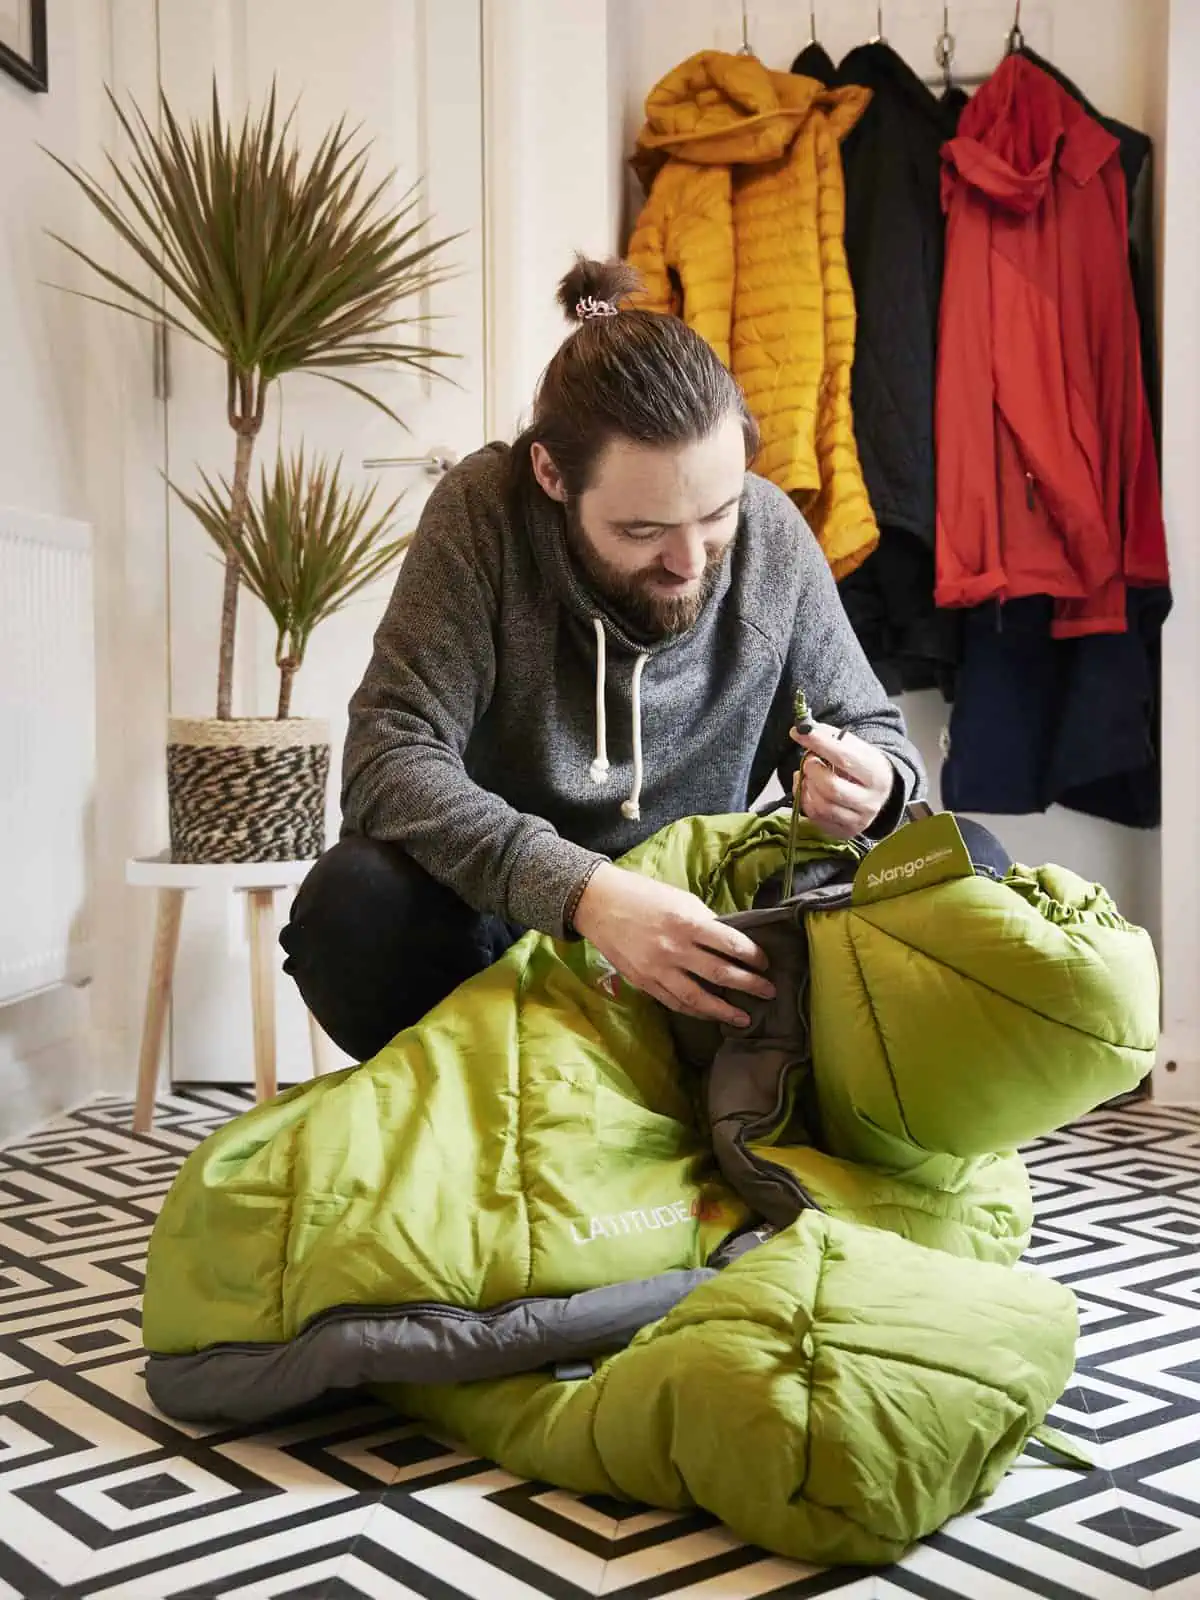 ID: A portrait image. Matt is crouched on the floor checking a green sleeping bag and prepping equipment. He is wearing a grey hoody. The floor is a black and white pattern, with plant in the background and some coats hung up behind. It is a light …